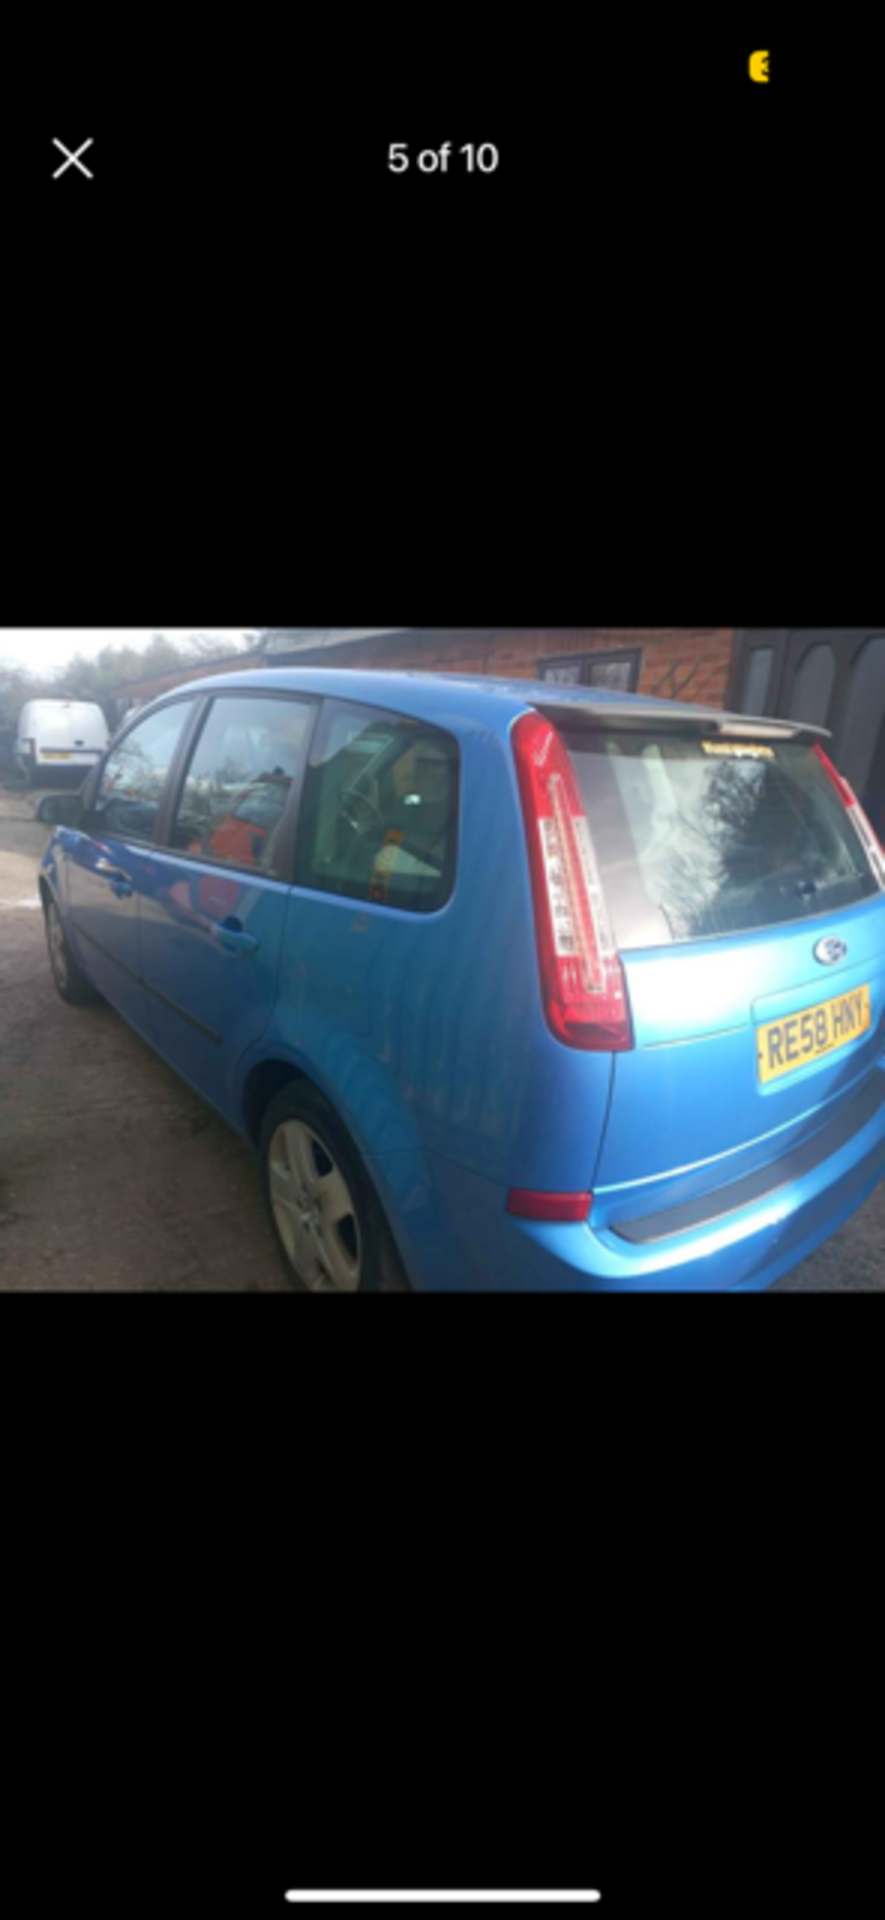 FORD CMAX RE58 HNY - Image 10 of 10